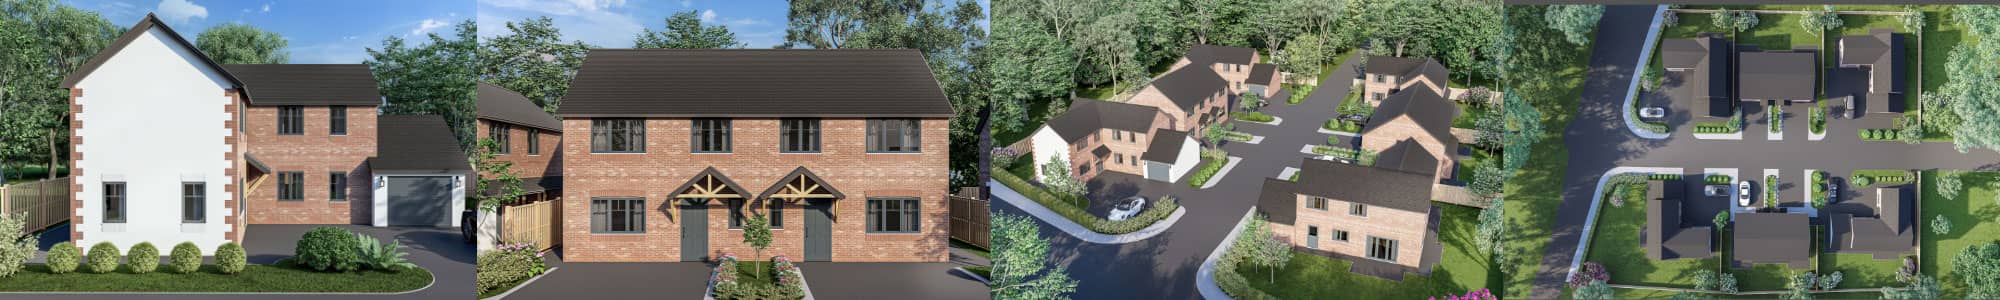 Examples of new homes built in Mold and North Wales